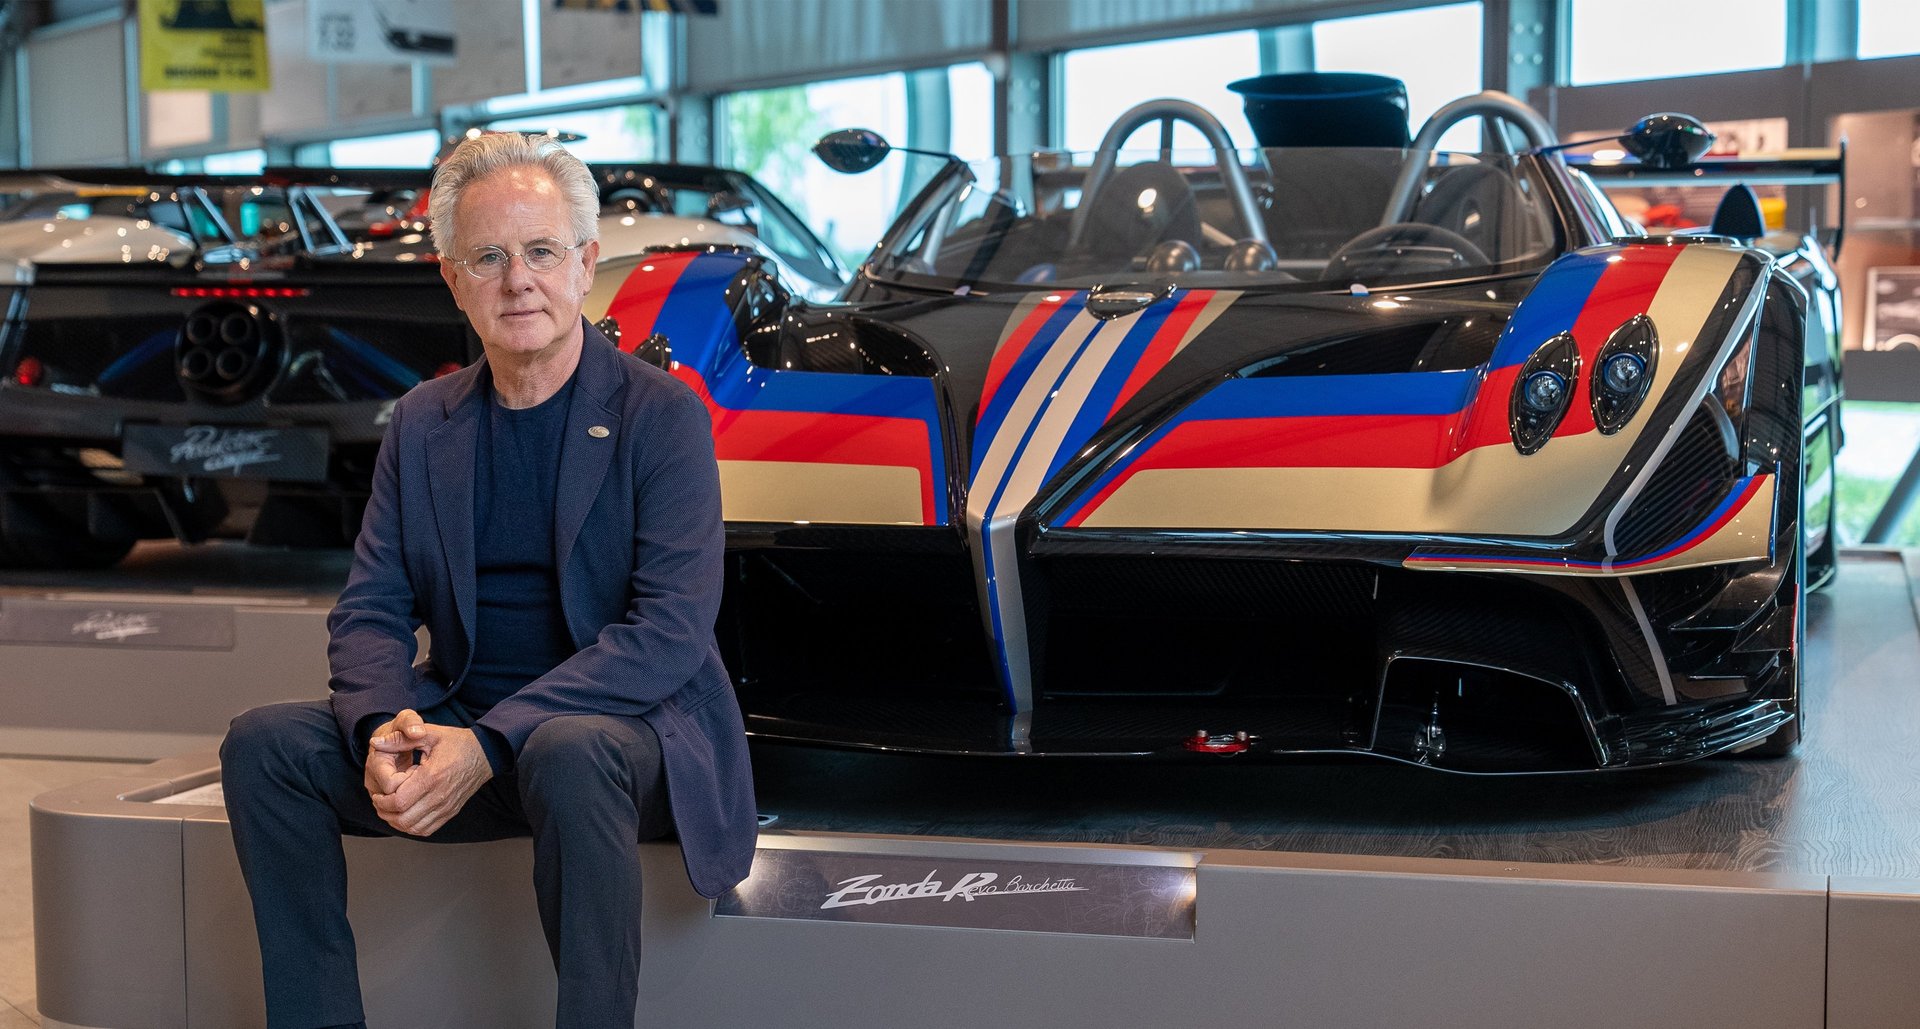 https://www.classicdriver.com/cdn-cgi/image/format=auto,fit=cover,width=1920,height=1029/sites/default/files/article_images/paganiinterview0_1.jpg